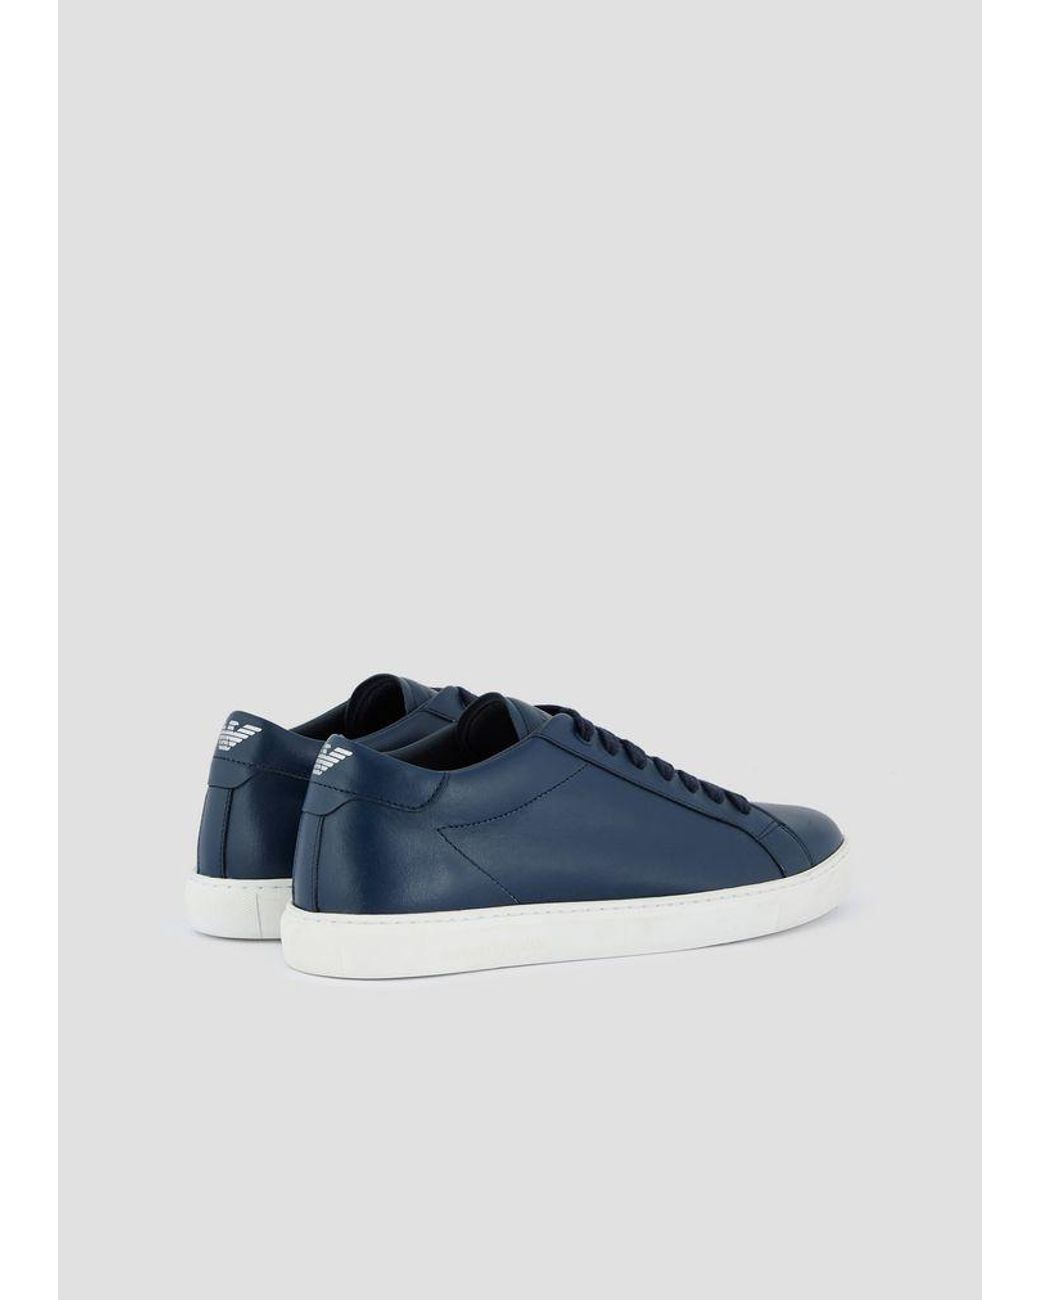 Emporio Armani Leather Sneakers in Navy 